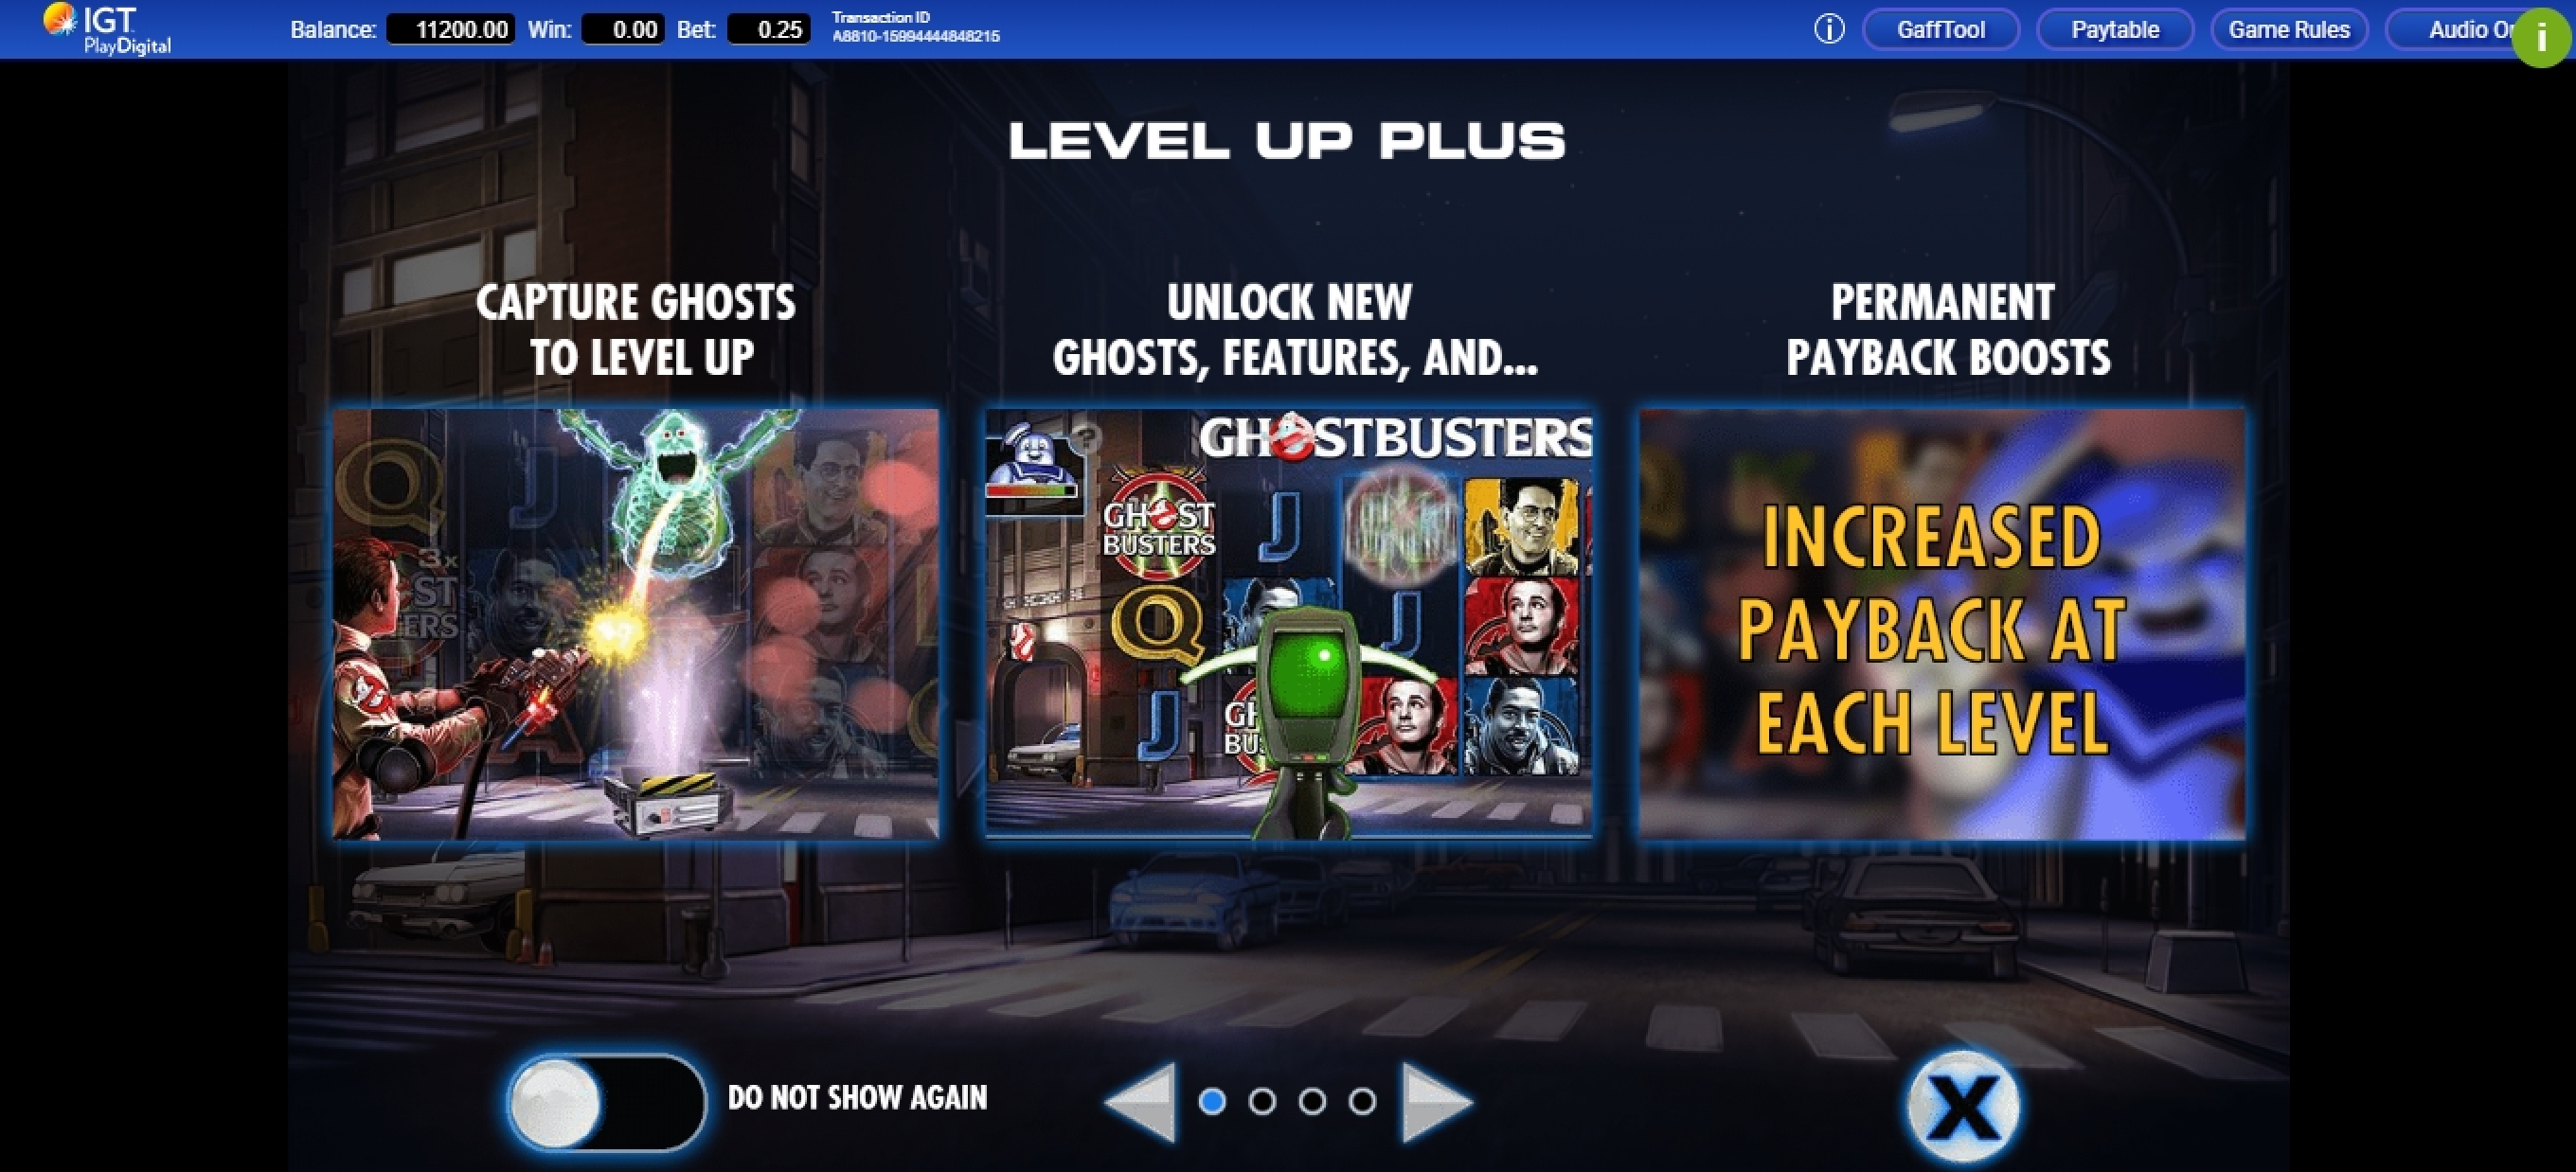 Play Ghostbusters Plus Free Casino Slot Game by IGT